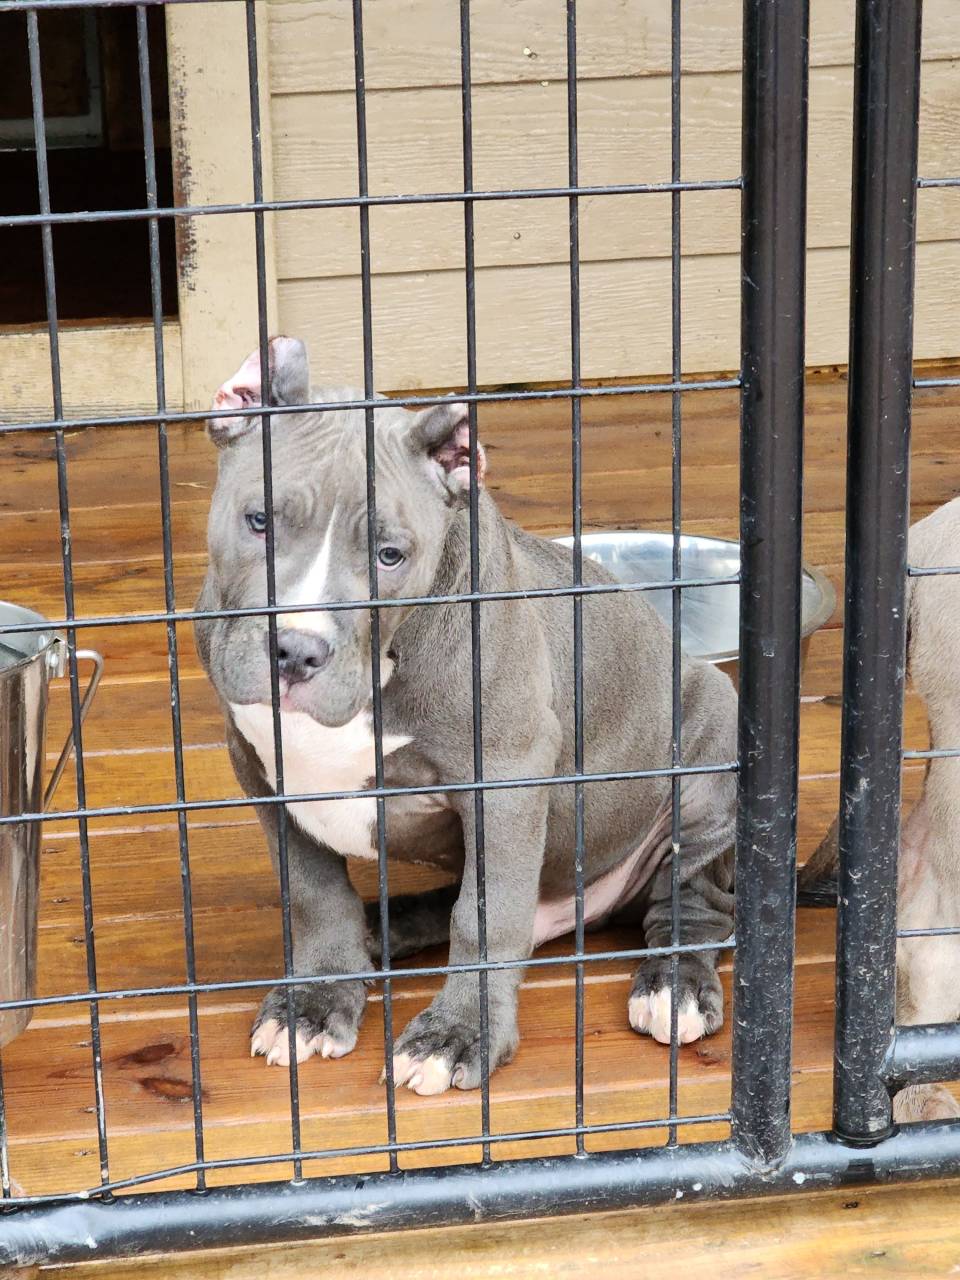 American Bully named Buster